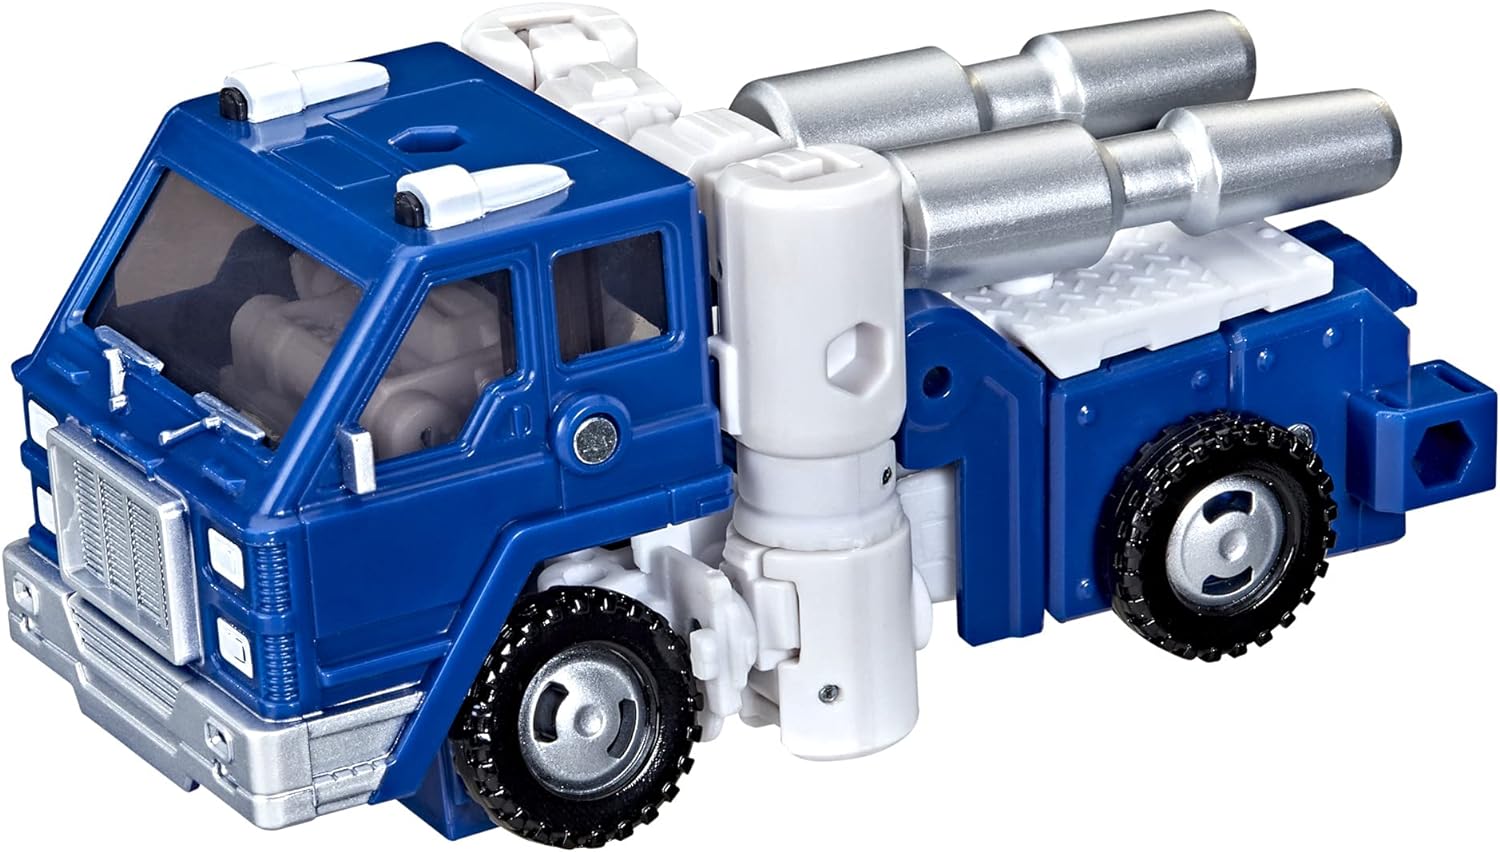 Transformers War for Cybertron Autobot Pipes